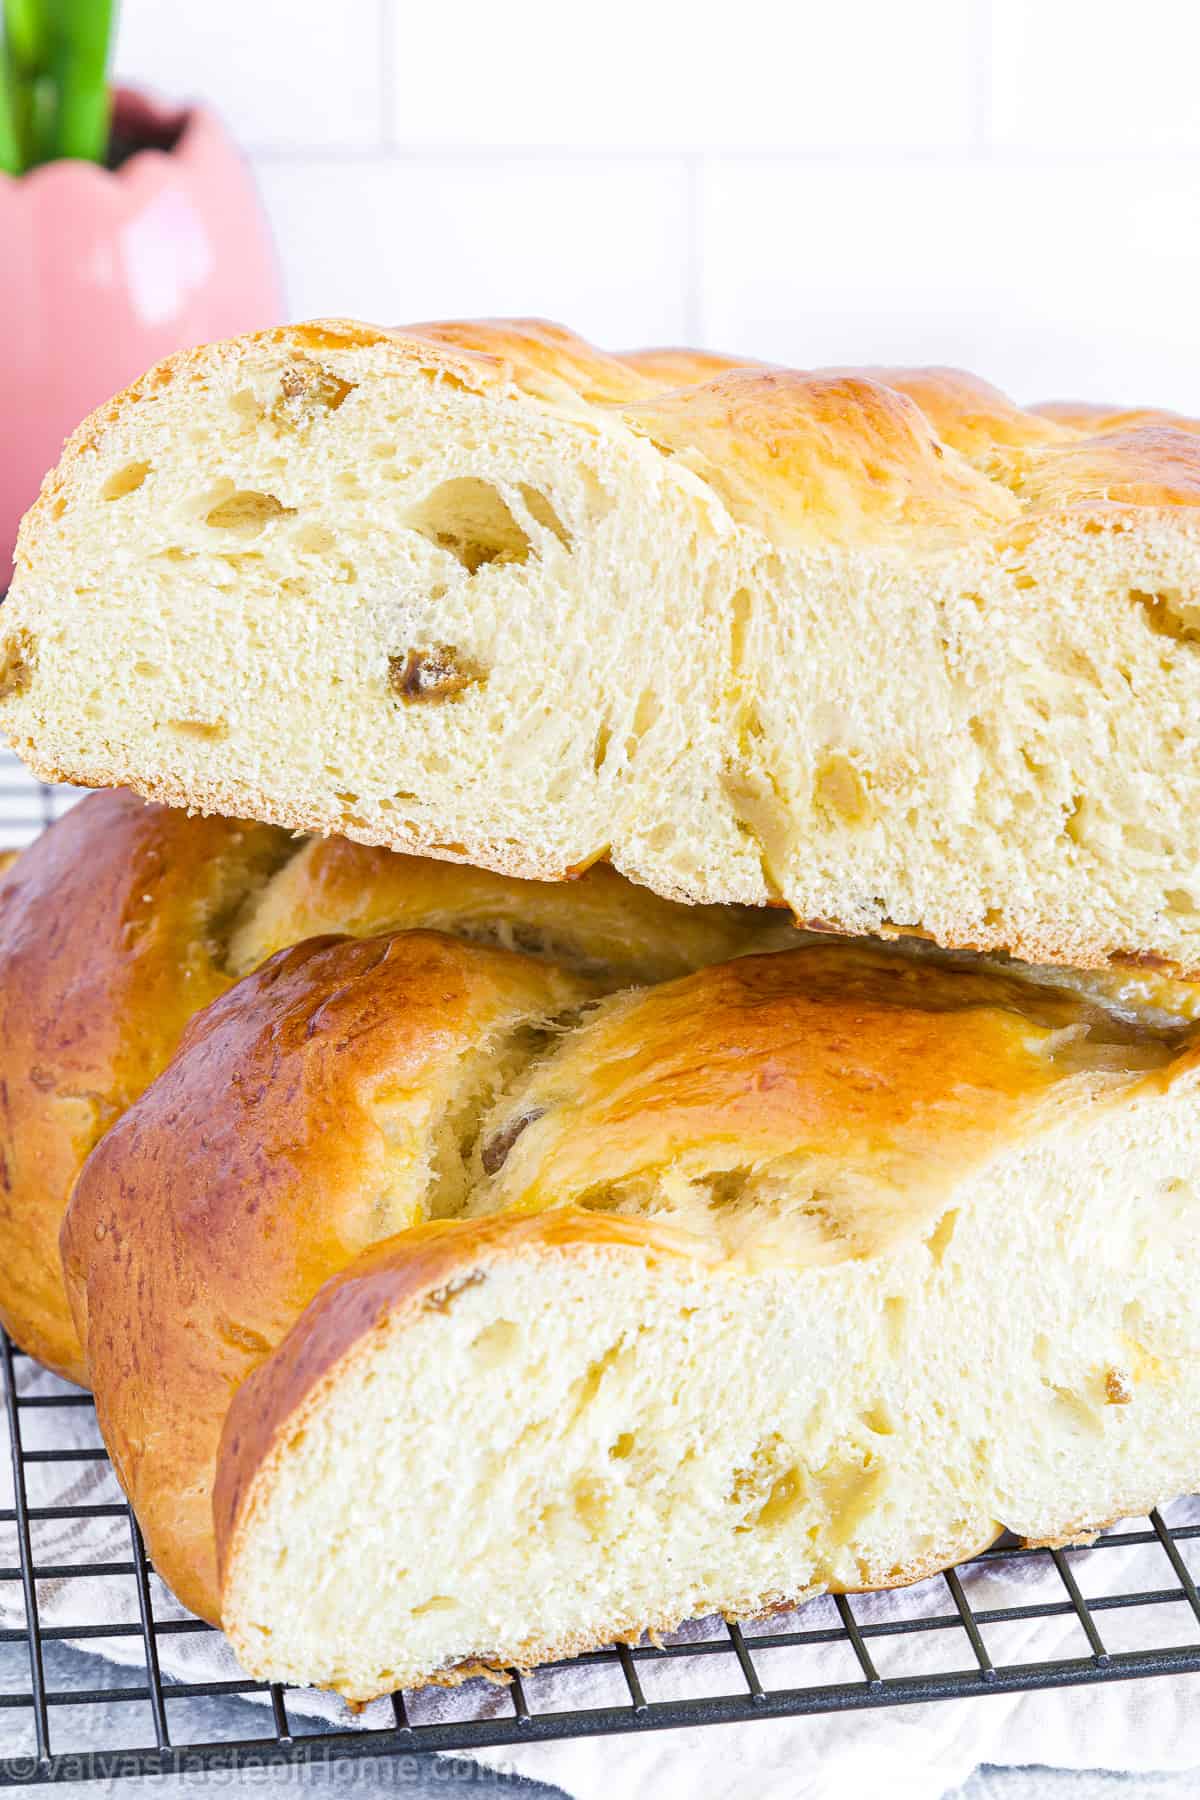 This is a classic holiday bread with a subtle, sweet flavor that goes perfectly with a little butter spread and a hot cup of tea or coffee.